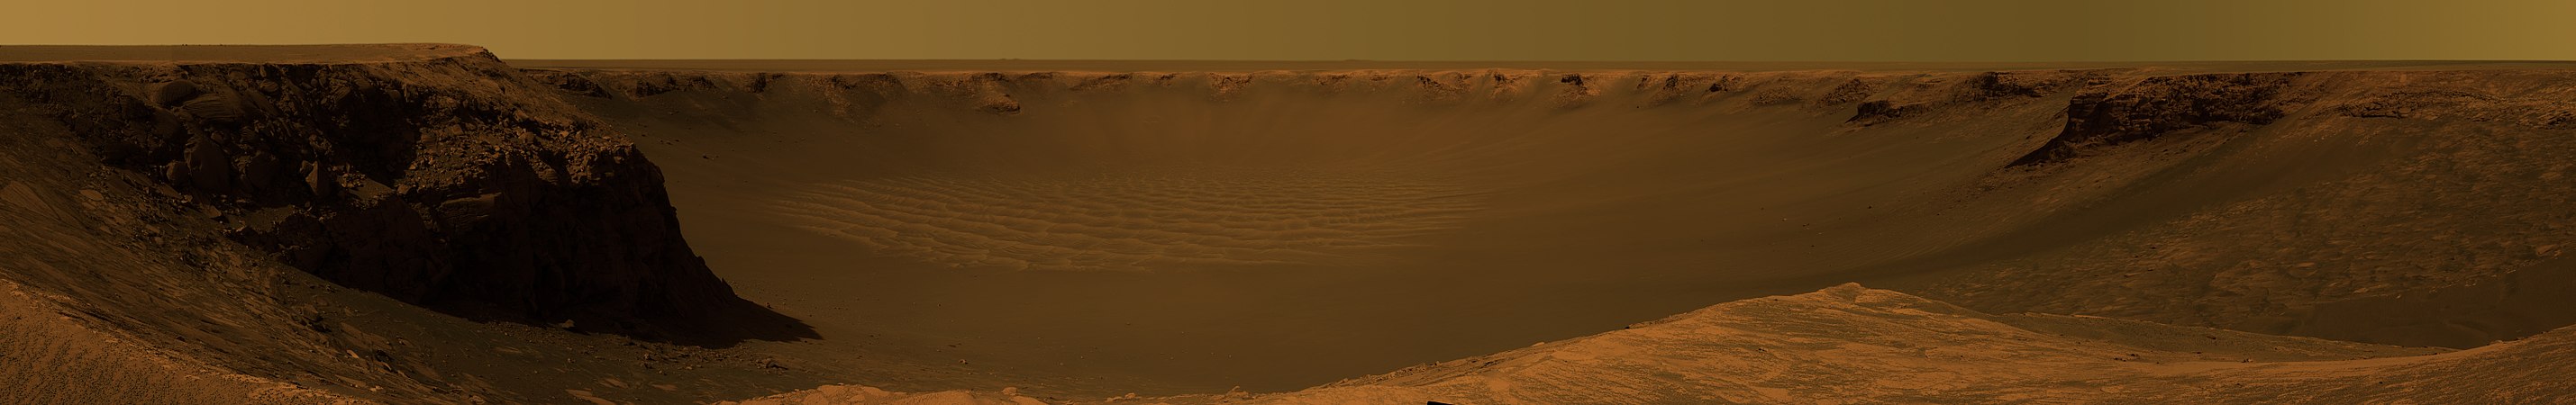 Victoria crater, by Opportunity